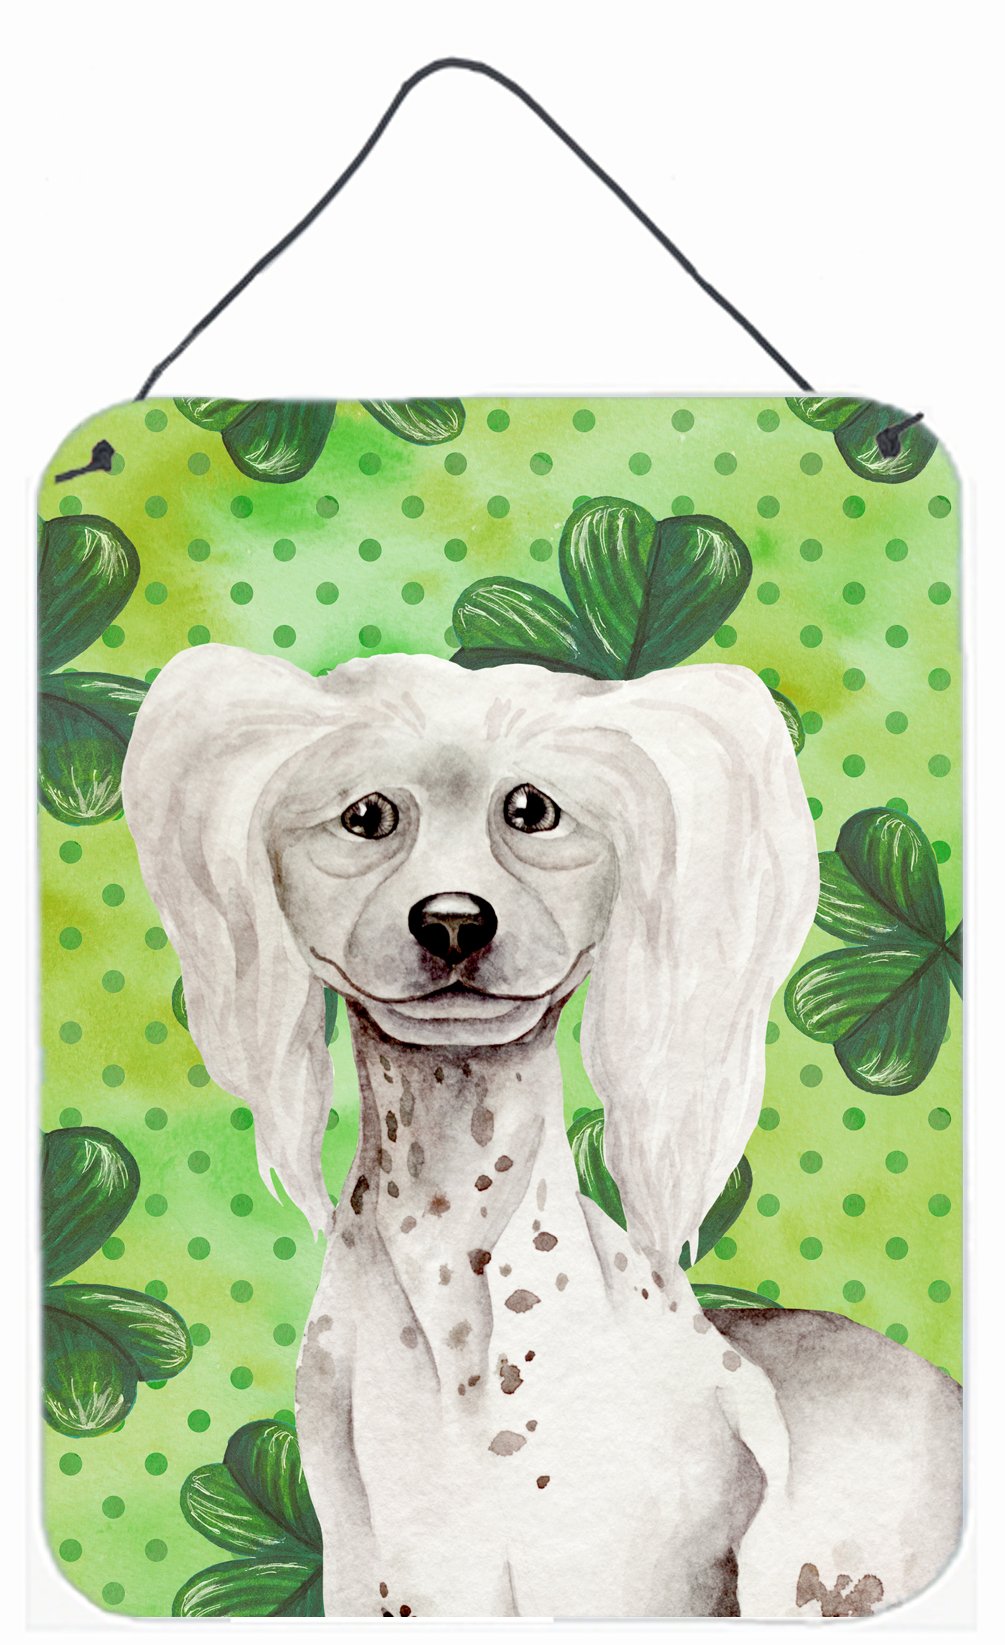 Chinese Crested Shamrocks Wall or Door Hanging Prints CK1401DS1216 by Caroline's Treasures